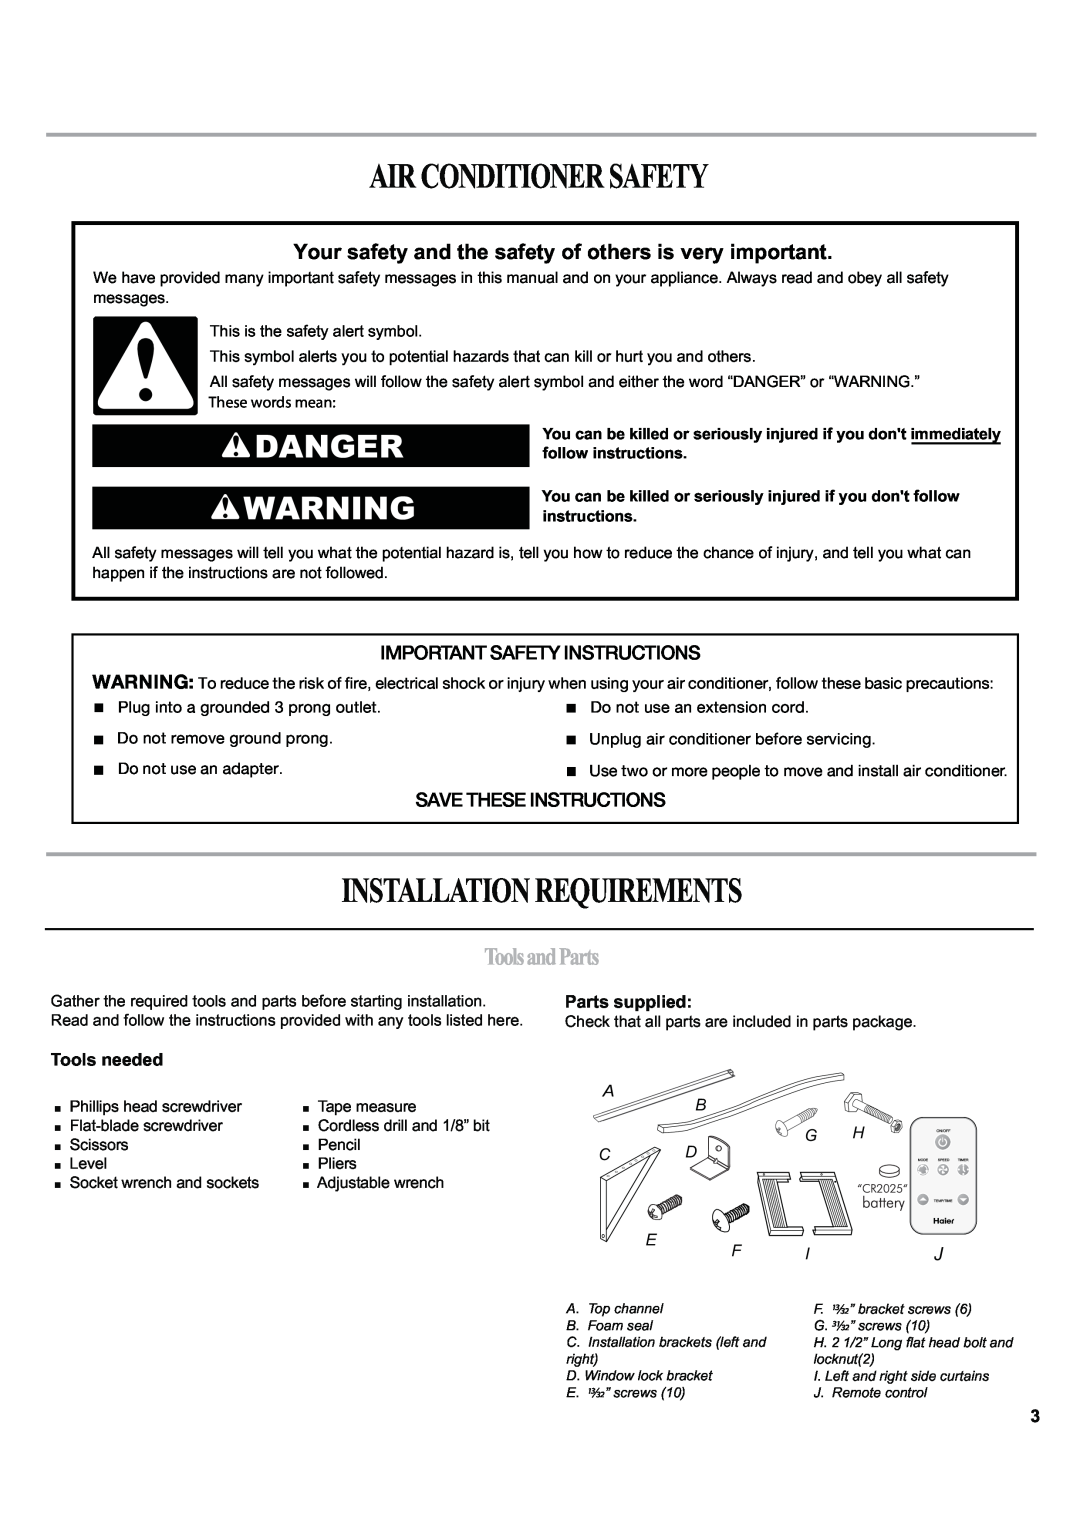 Haier ESA424J manual Airconditionersafety, Installationrequirements, Danger, ToolsandParts, Important Safety Instructions 